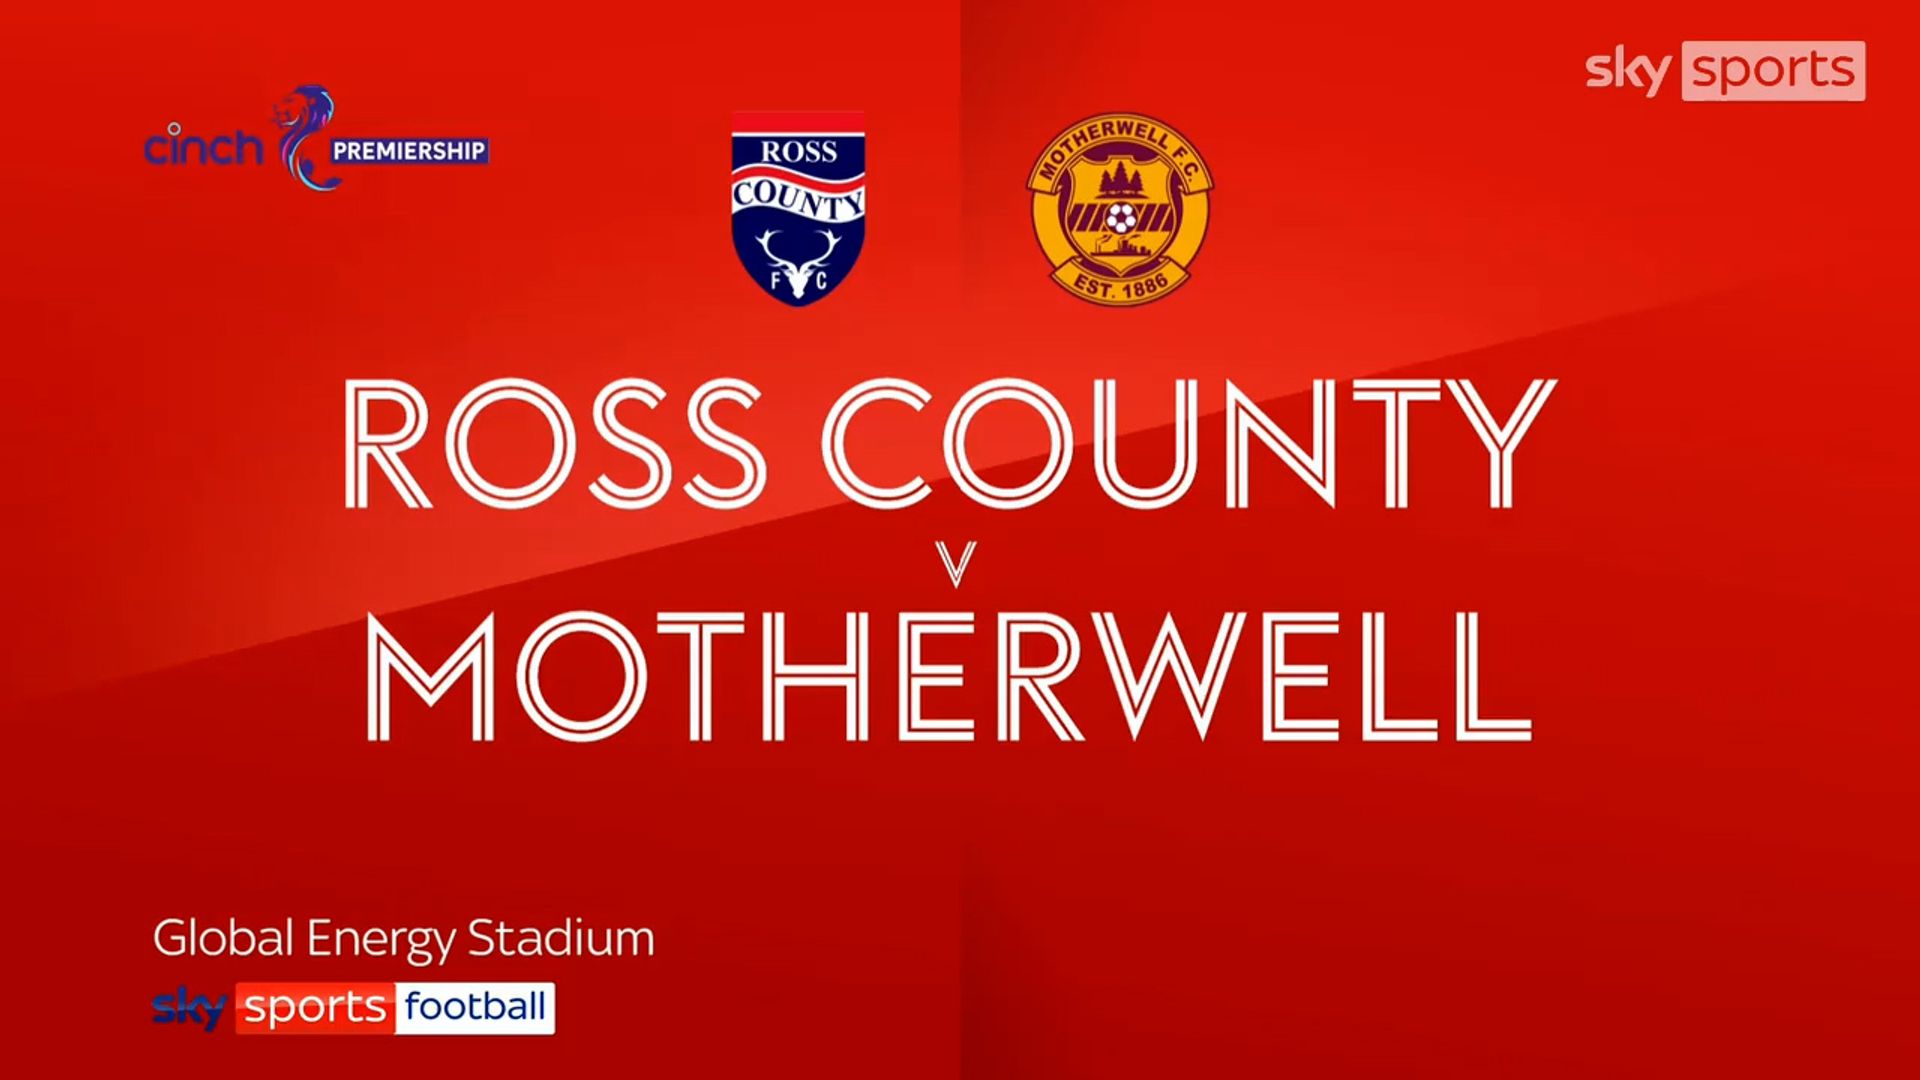 Ross County 0-5 Motherwell